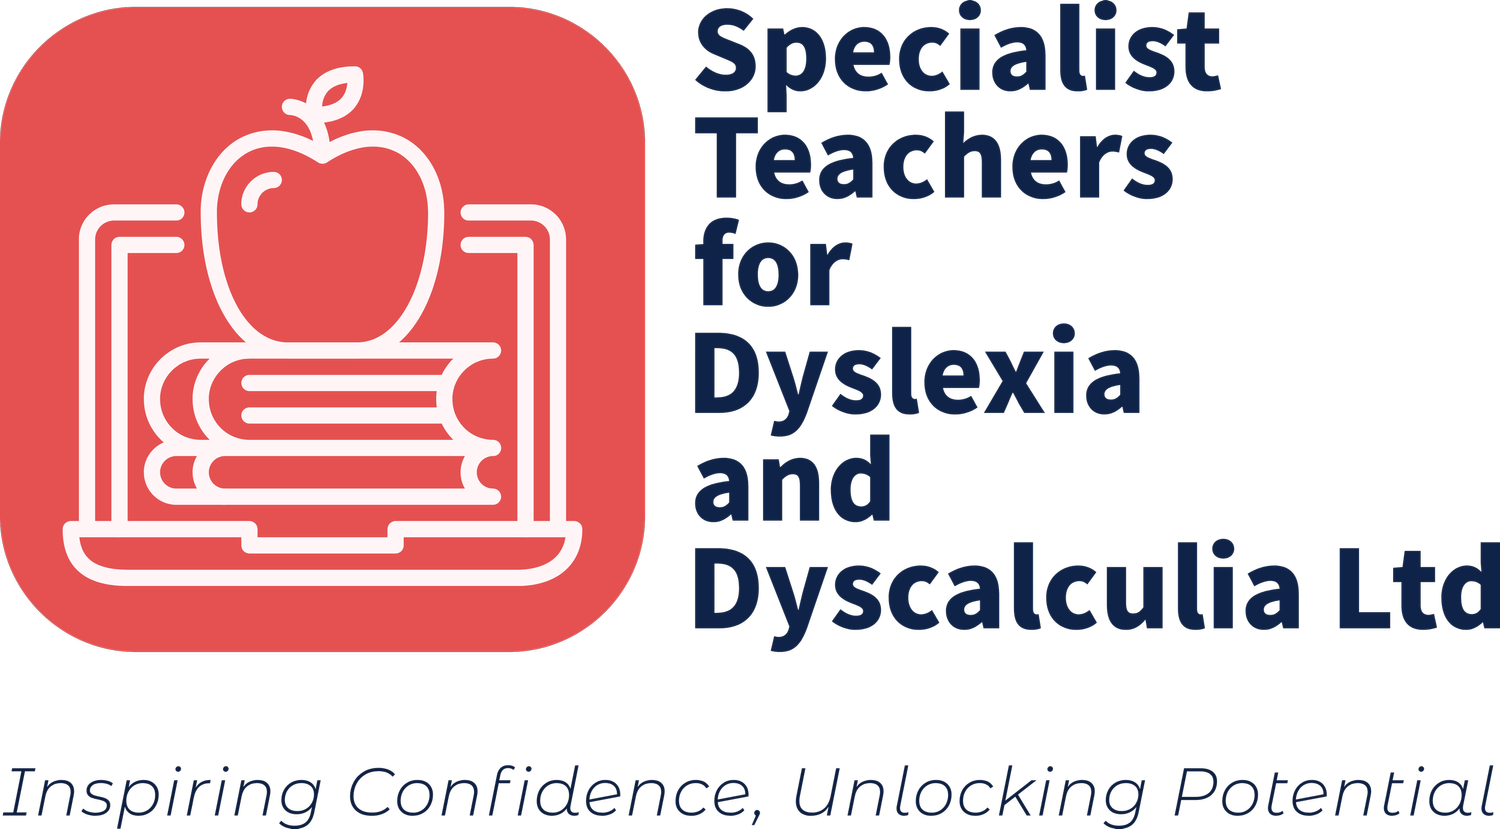 Specialist Teachers for Dyslexia and Dyscalculia